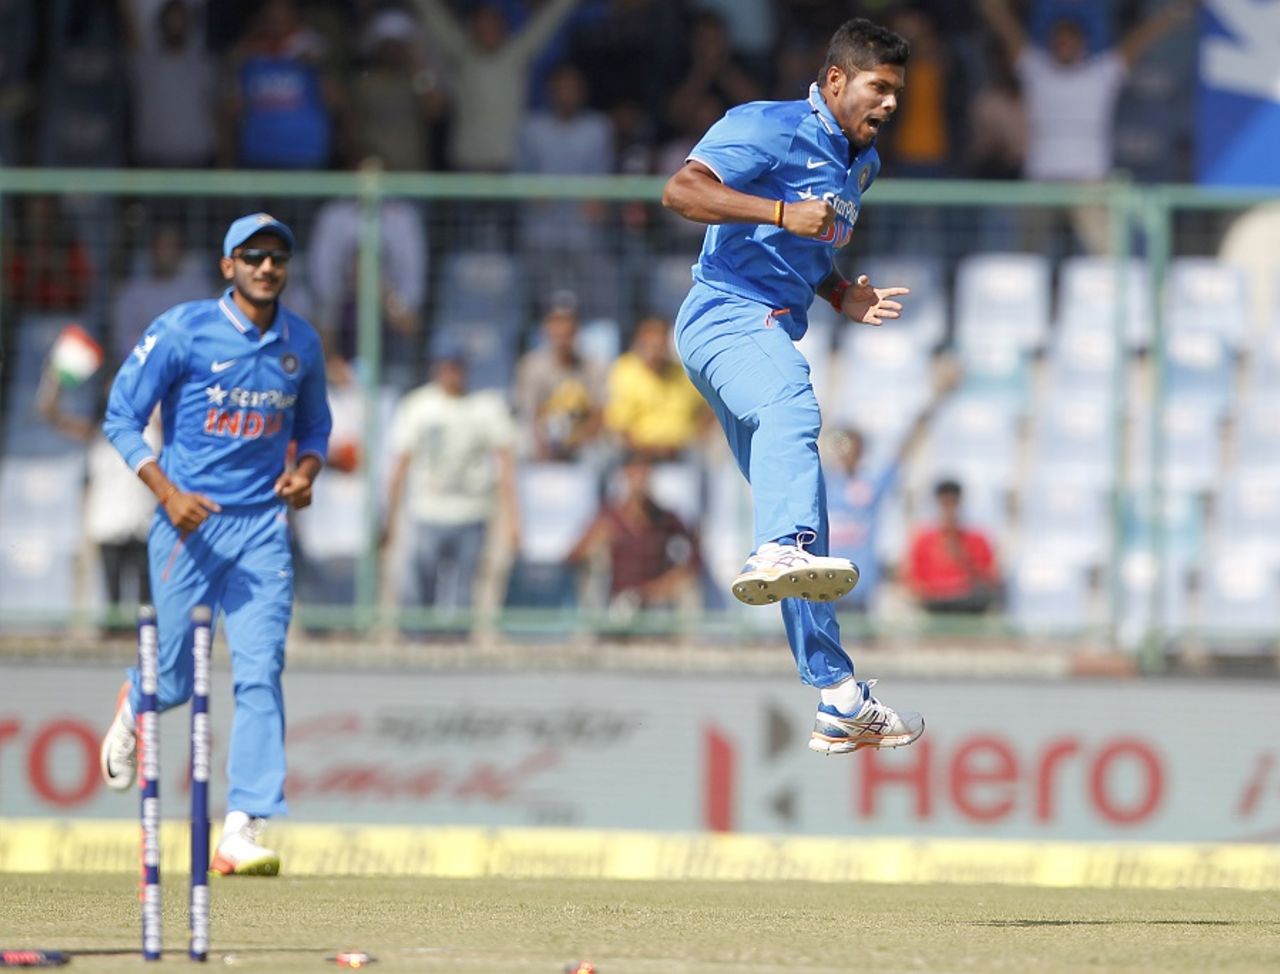 Umesh Yadav was elated with his early strike, India v New Zealand, 2nd ODI, Delhi, October 20, 2016